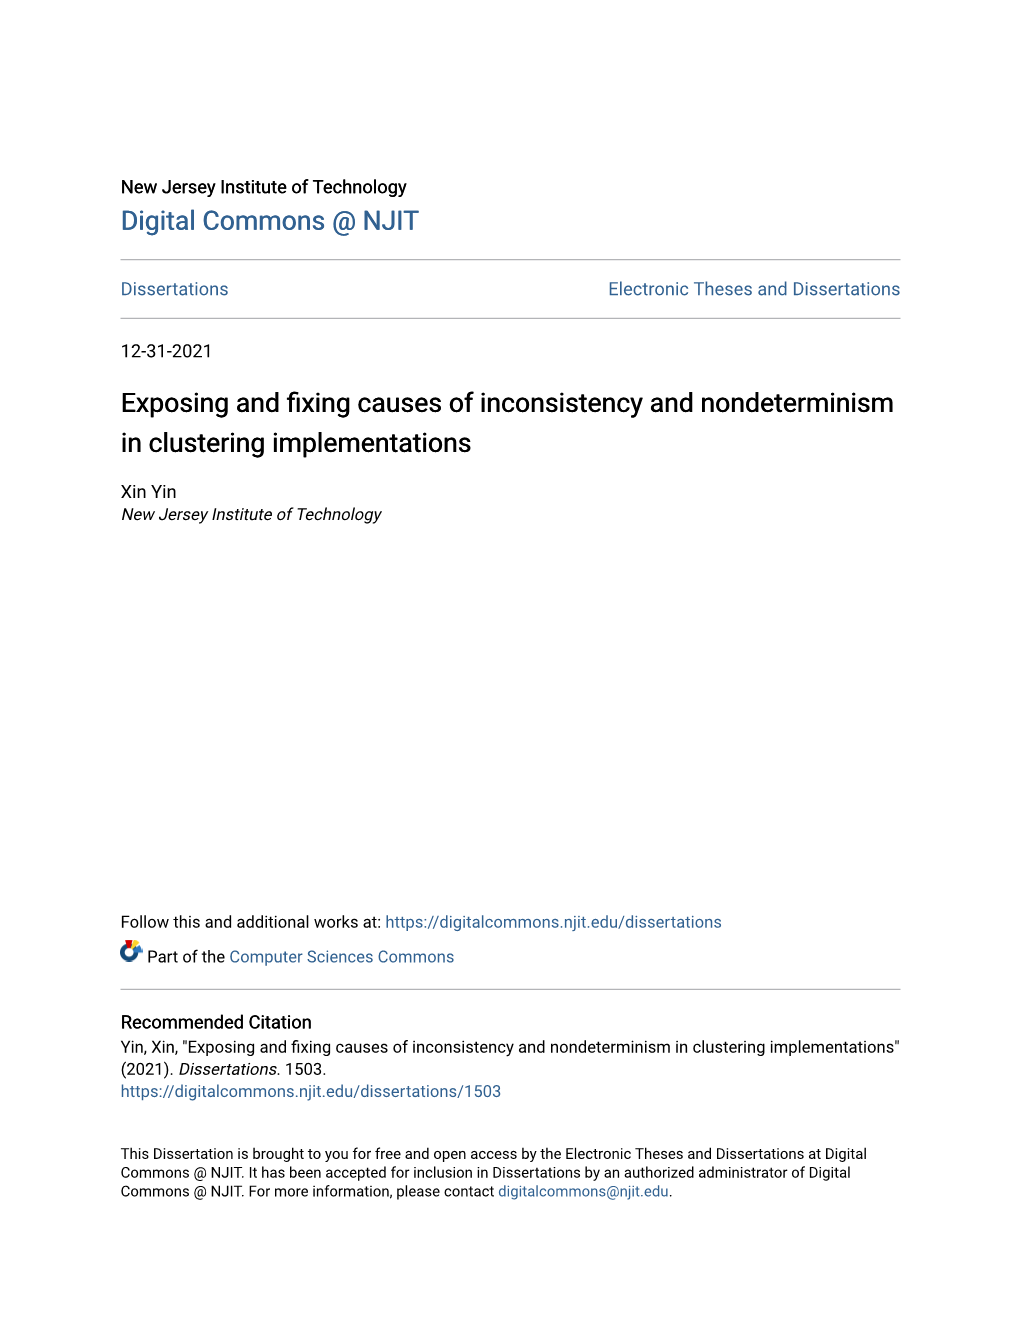 Exposing and Fixing Causes of Inconsistency and Nondeterminism in Clustering Implementations